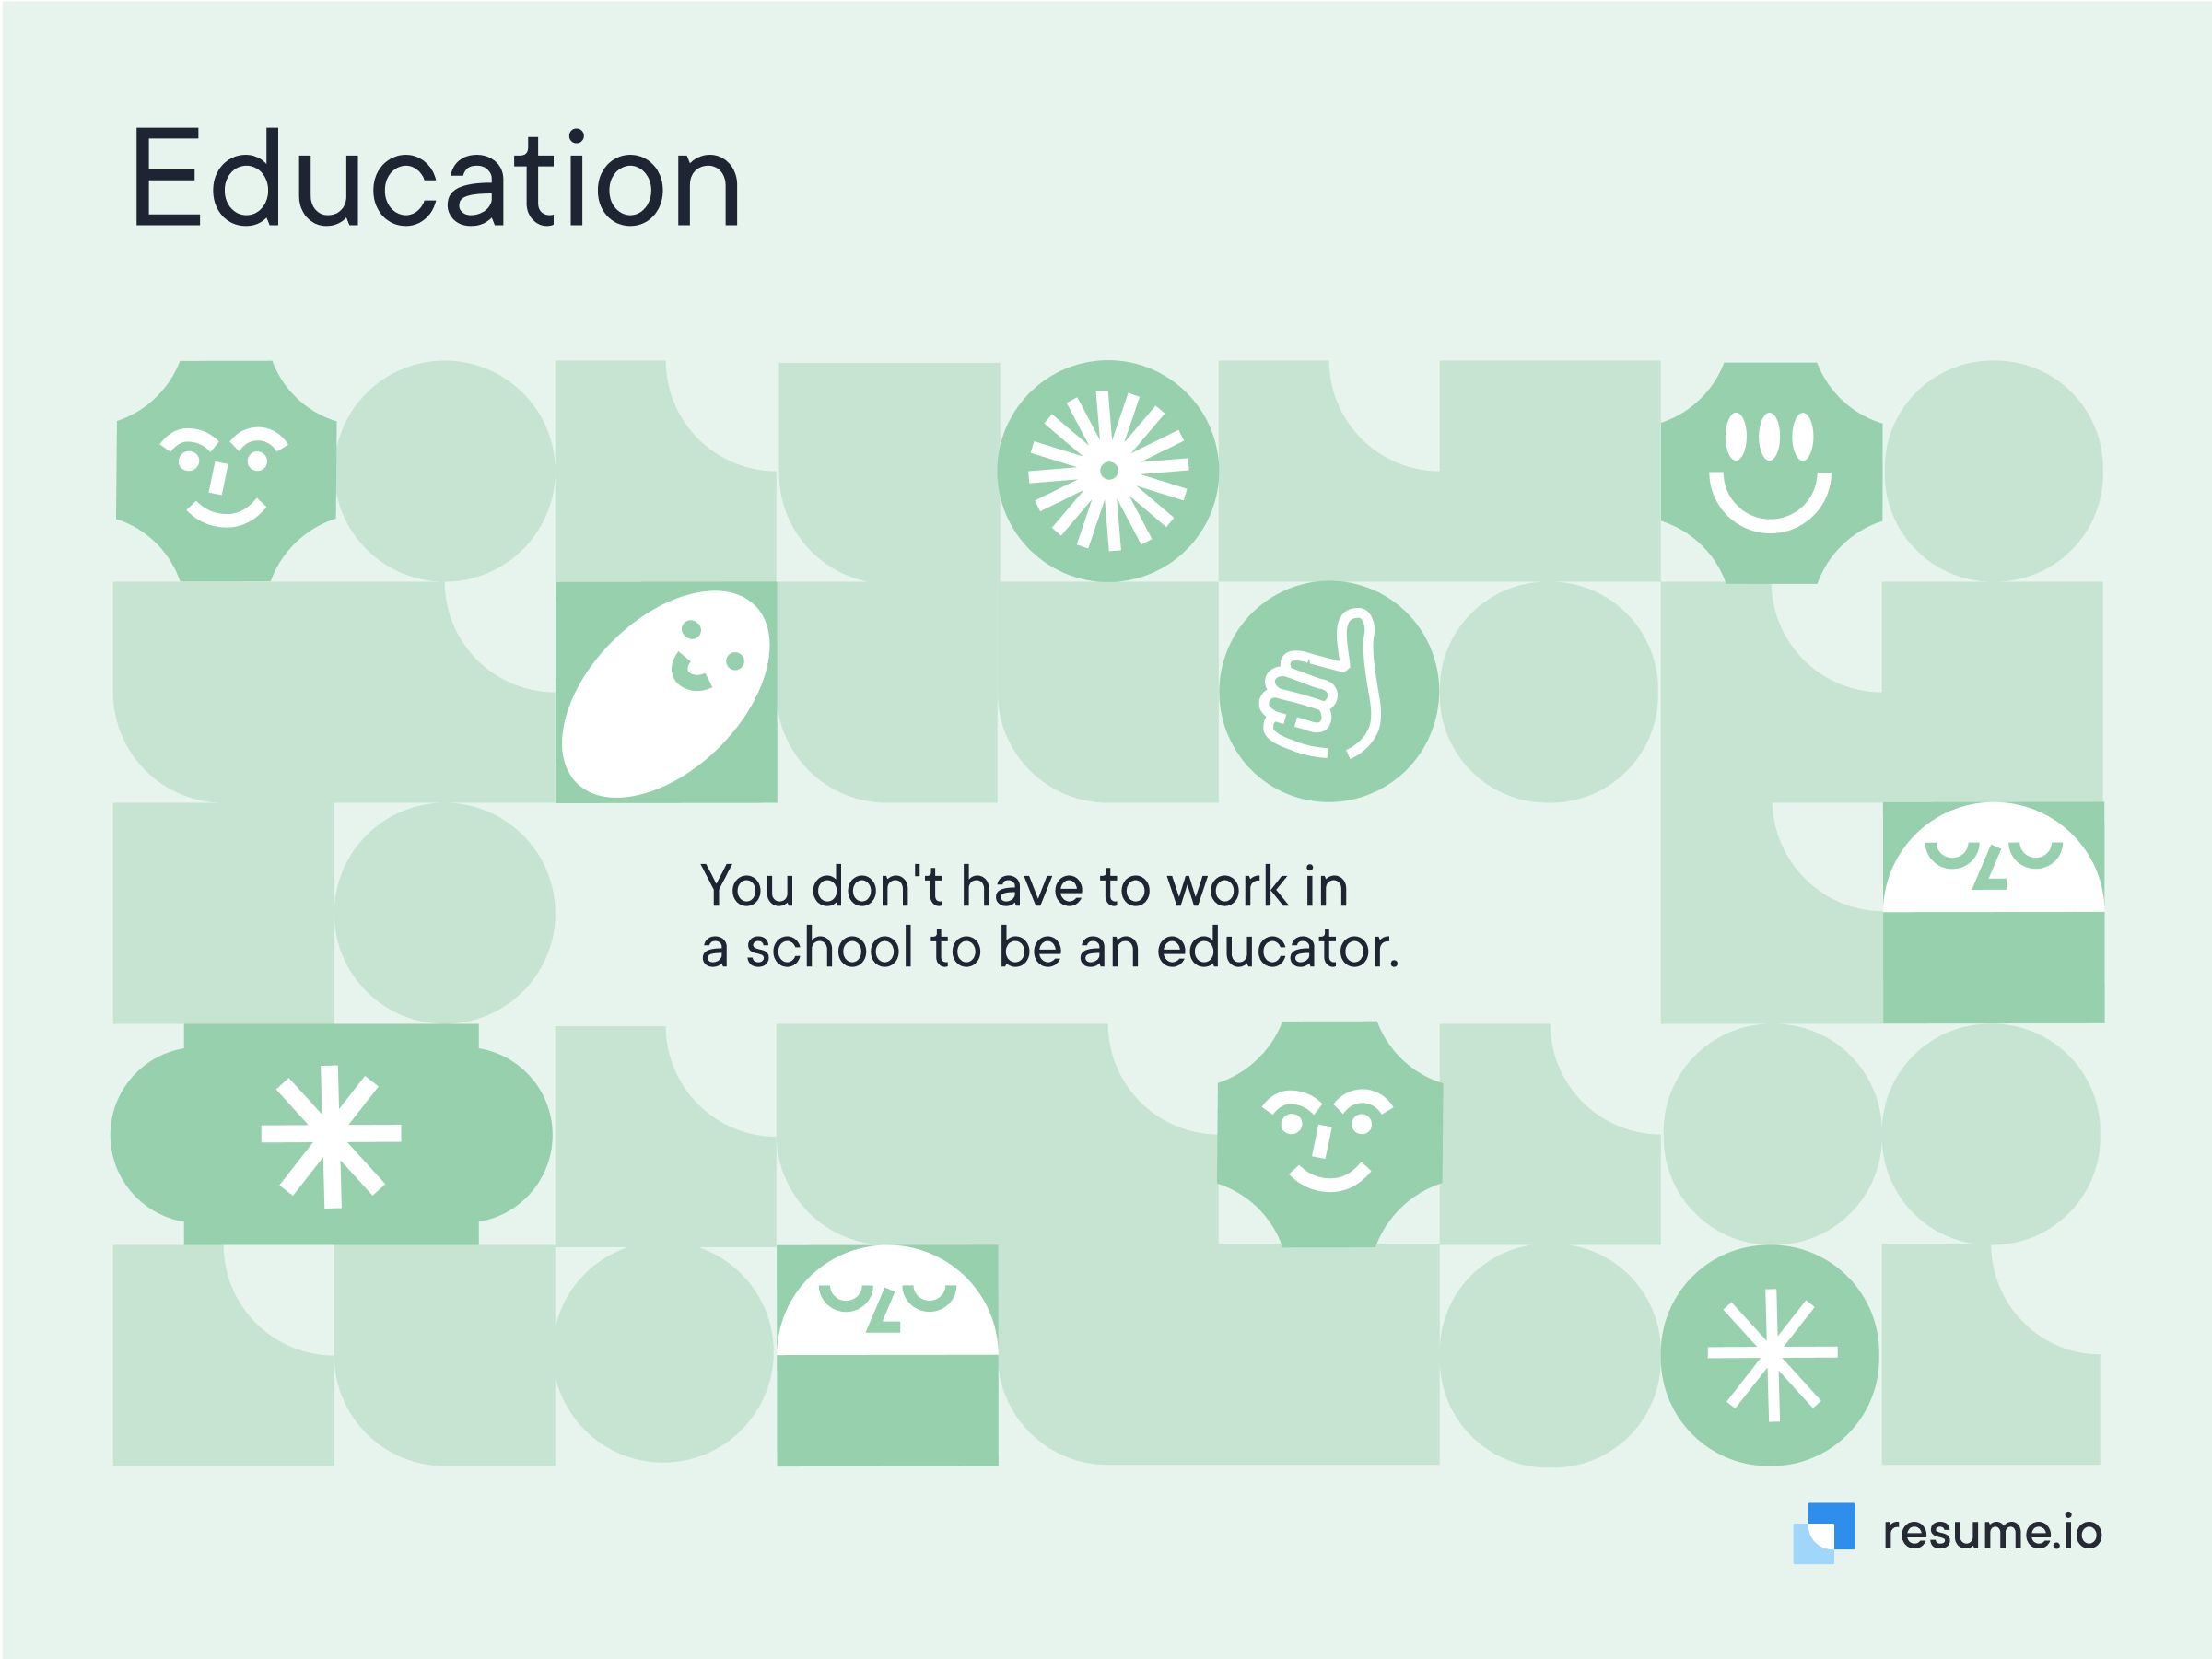 Different green shapes saying you don't have to work in a school to be an educator